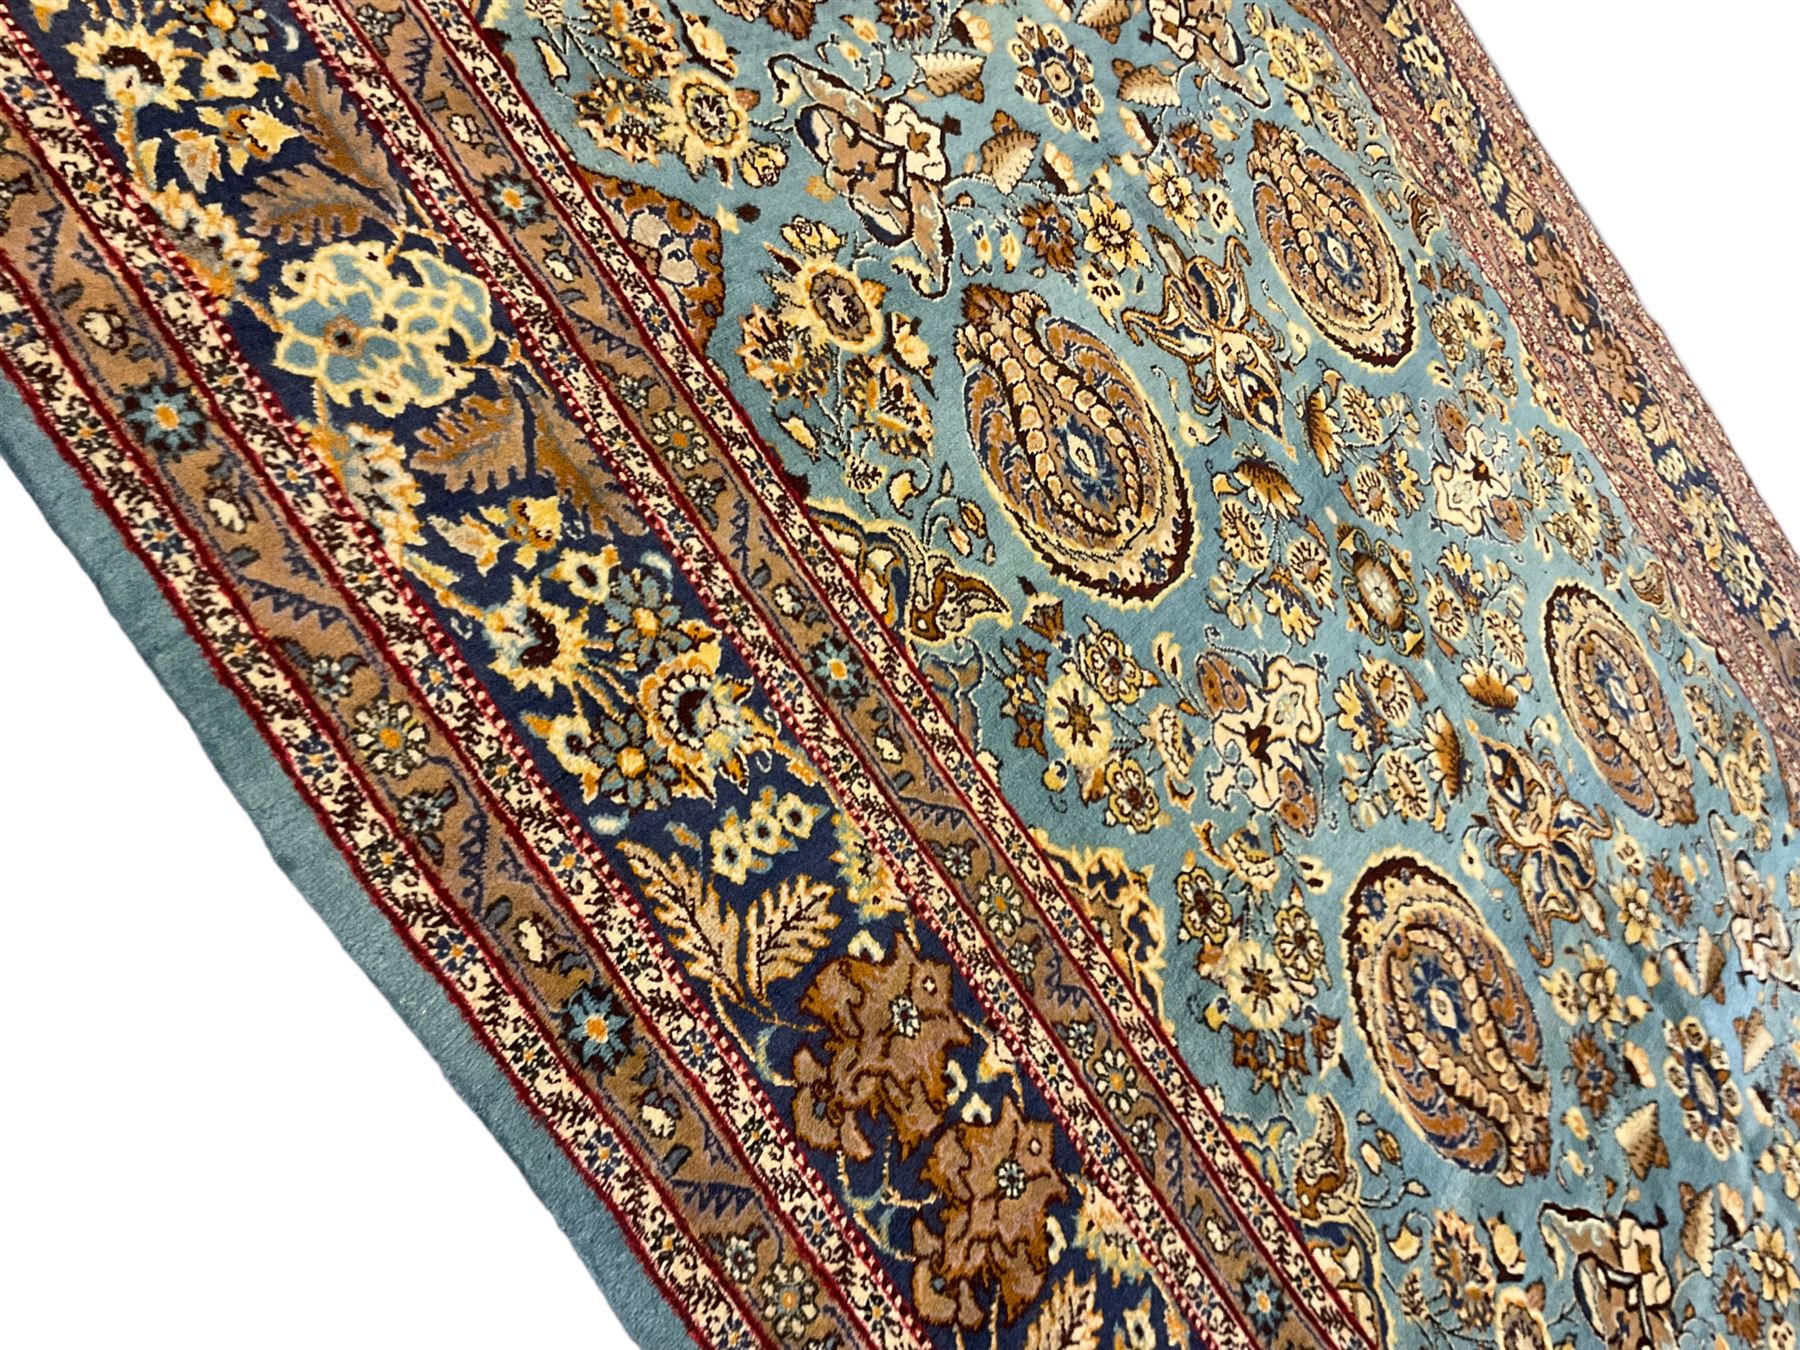 Central Persian Qum pale blue ground rug - Image 4 of 6